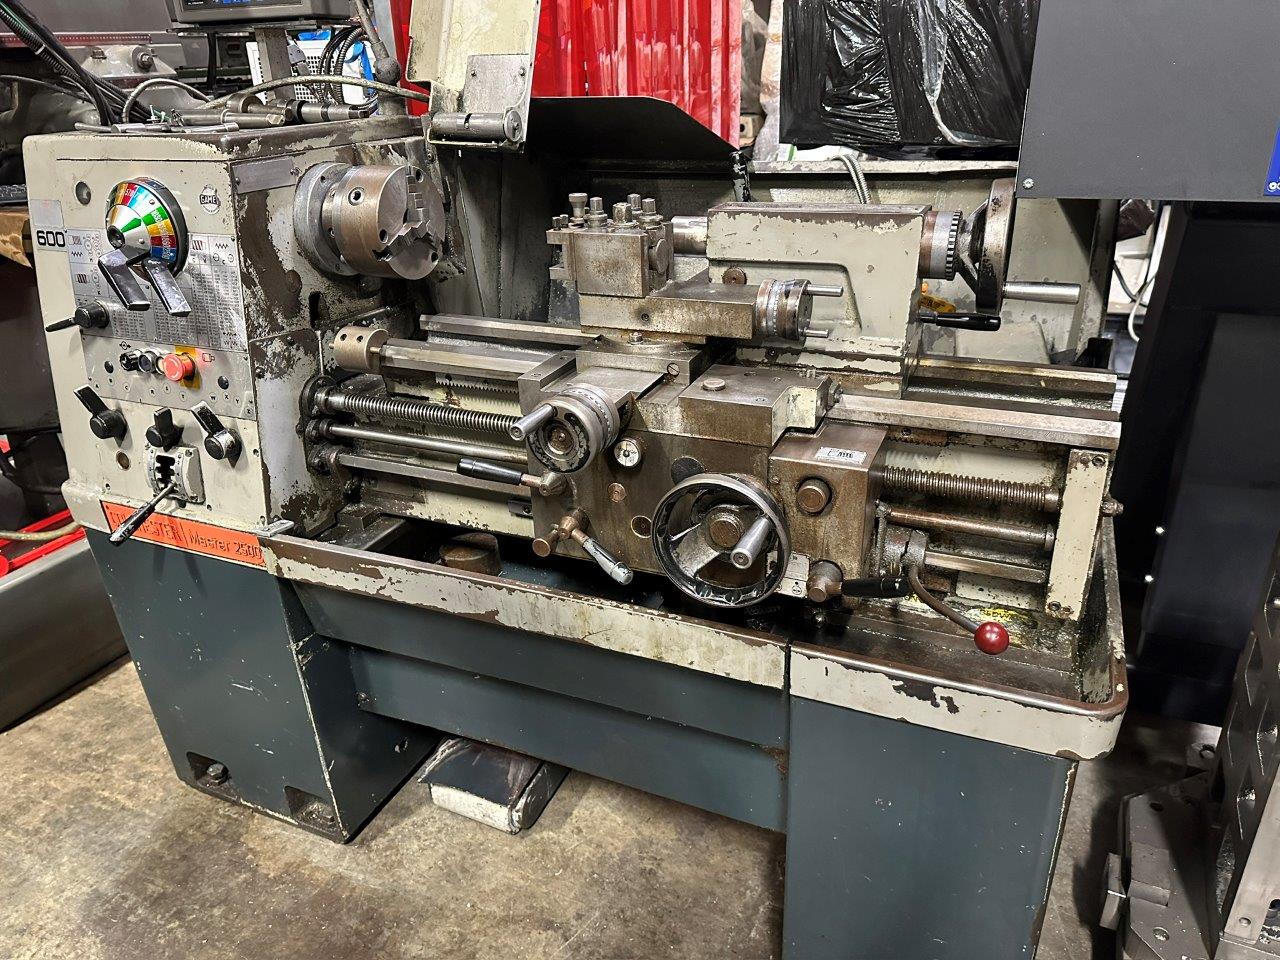 Gap Bed Lathes/Used Colchester Master 2500 x 25" Gap Bed Centre Lathe (4243)